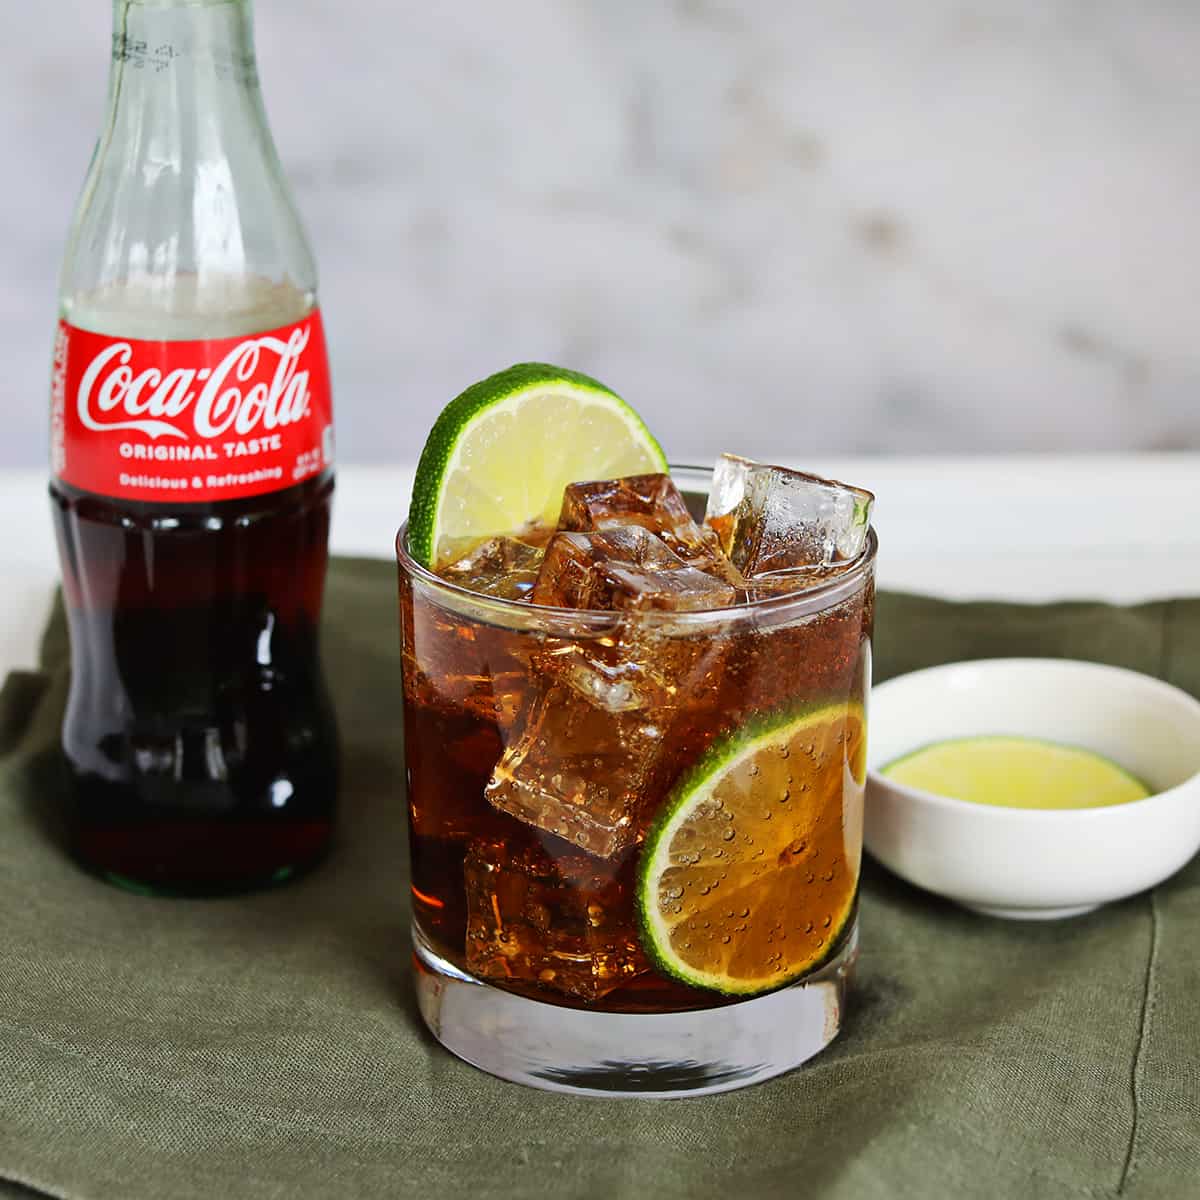 How to Make a Great Rum and Coke